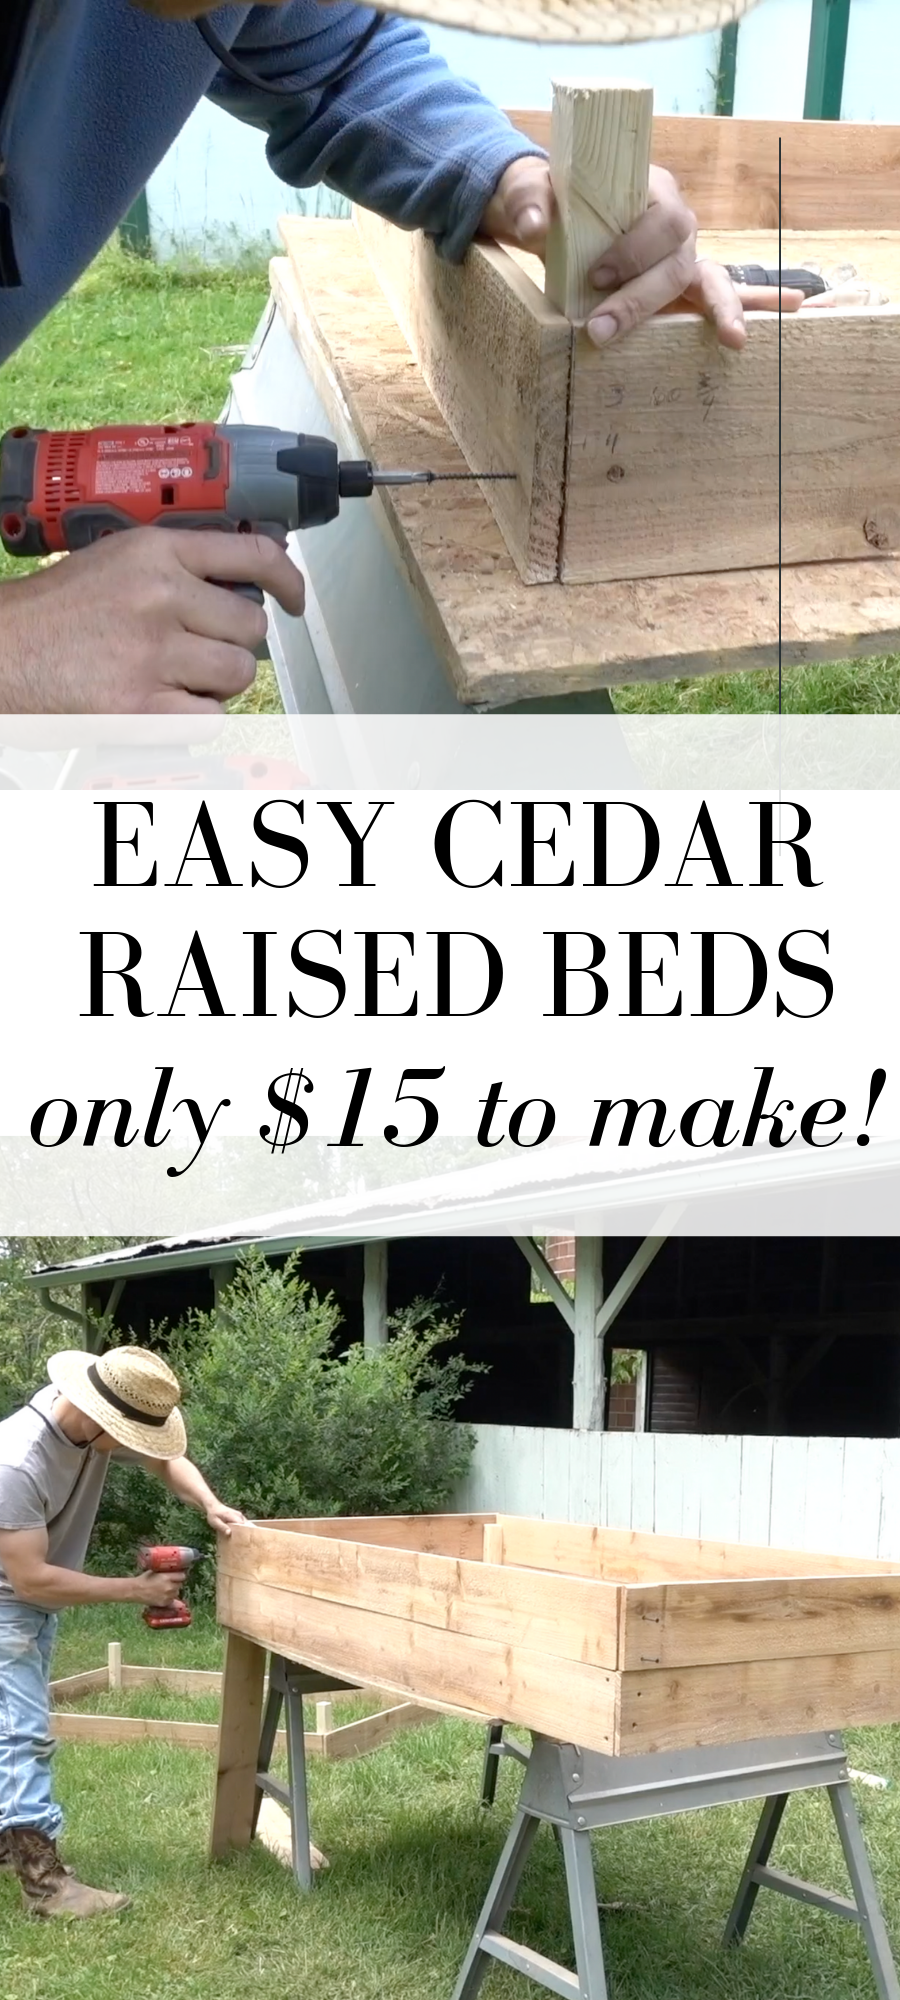 How To Build A Raised Garden Bed For Cheap -   13 planting Garden awesome ideas